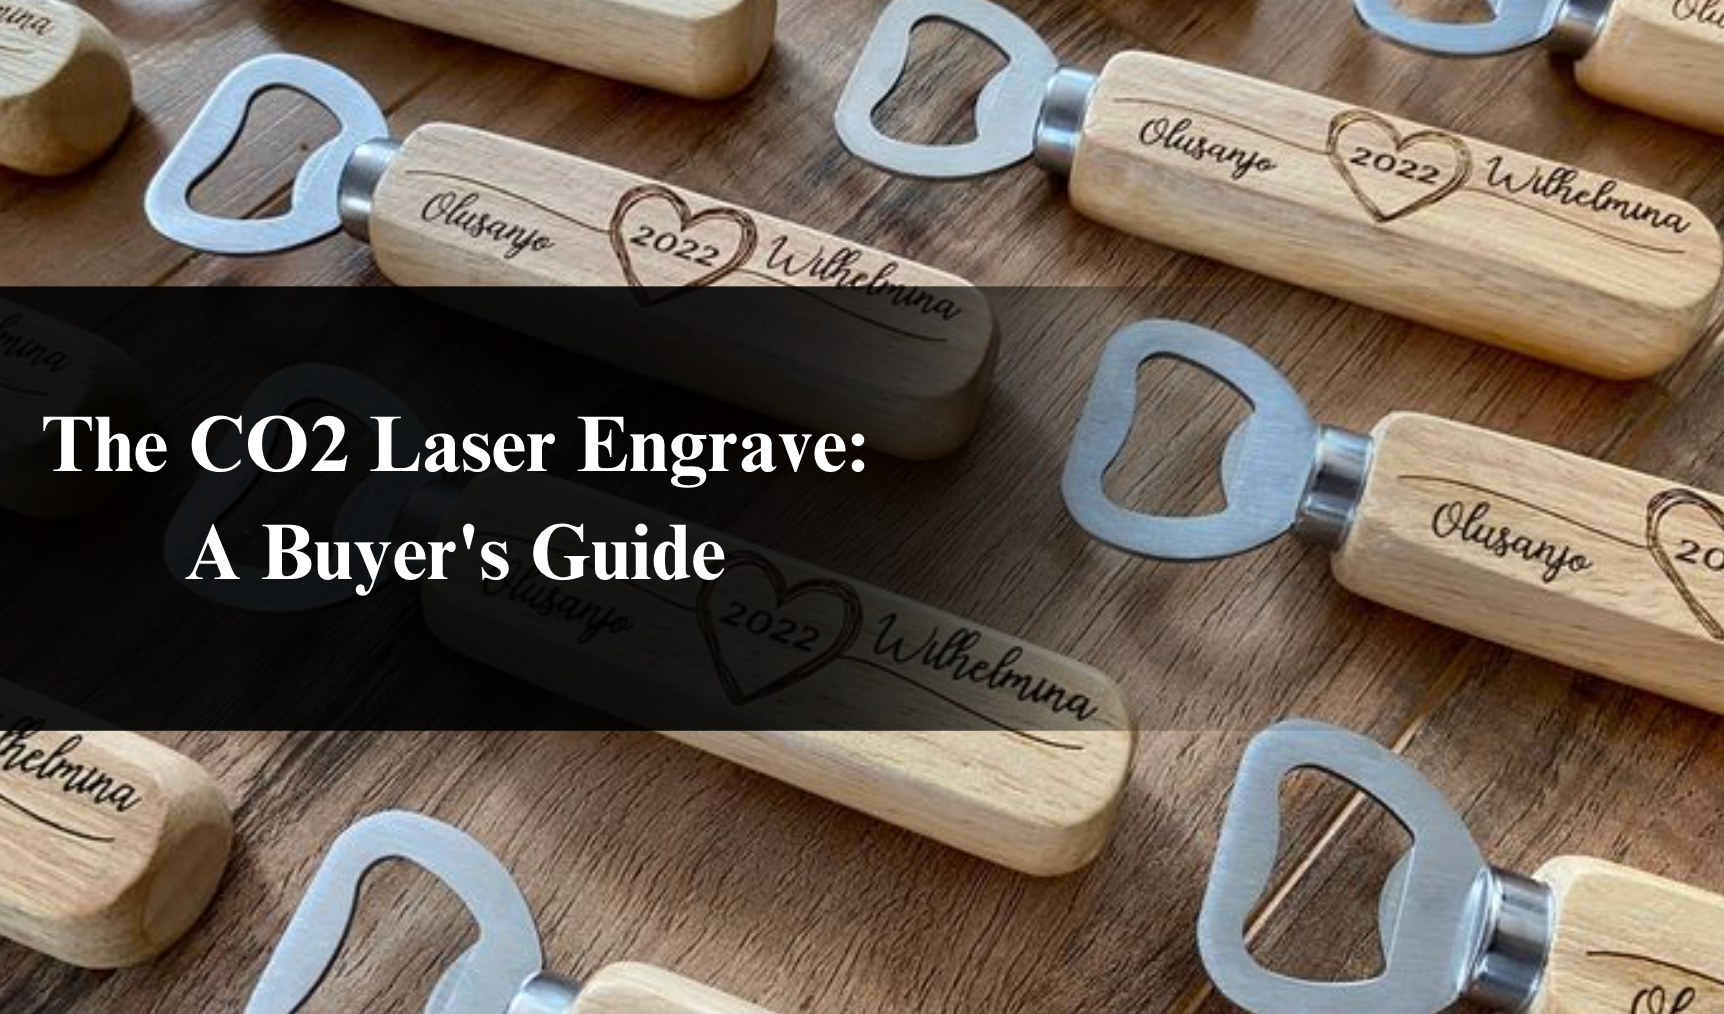 The CO2 Laser Engrave: A Buyer's Guide